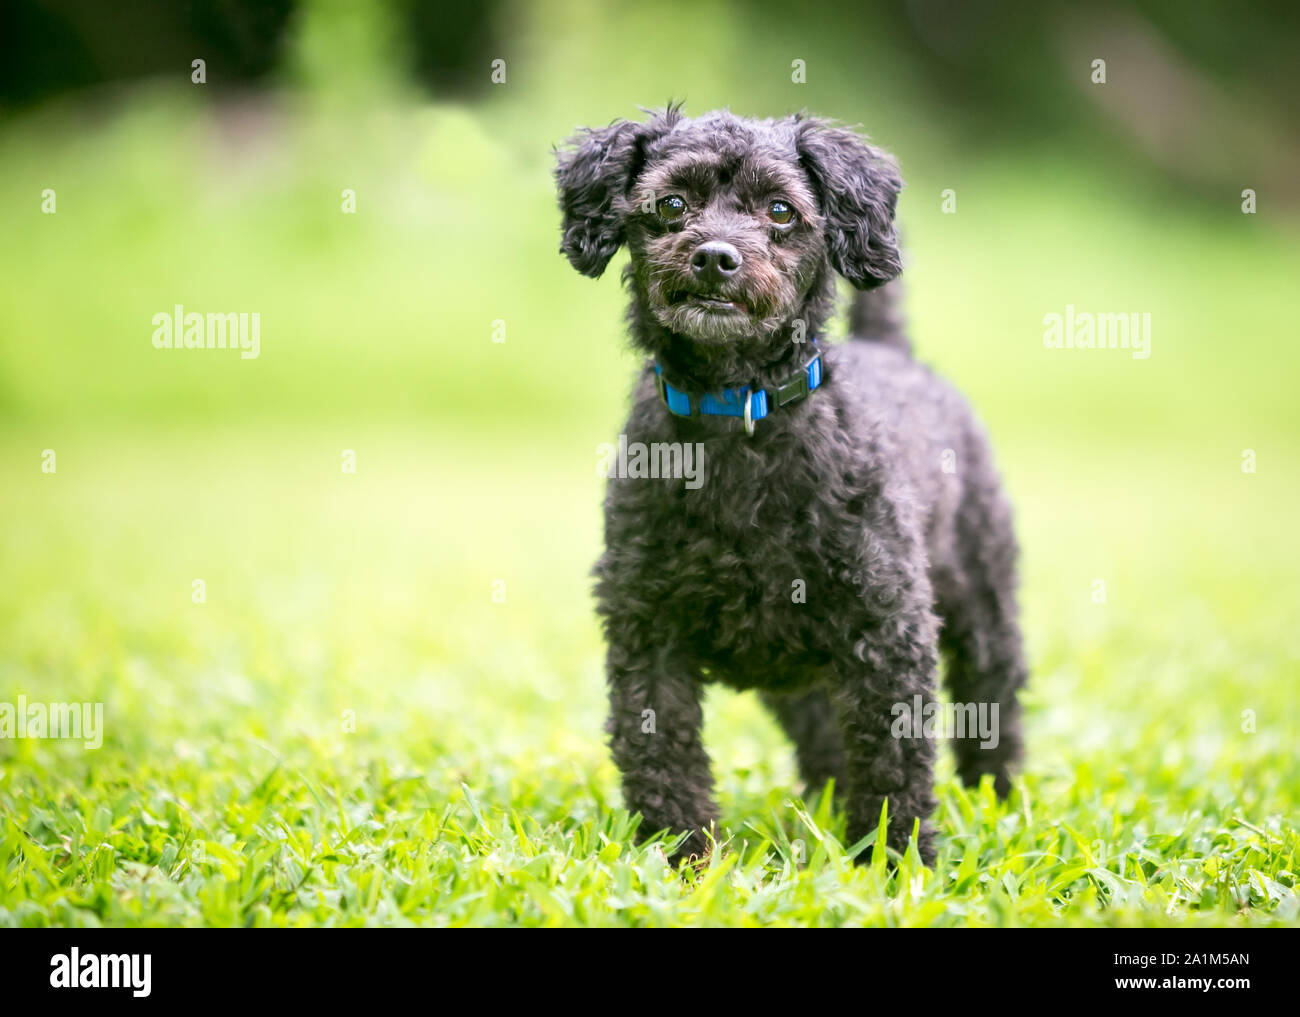 A small black Poodle mixed breed dog standing outdoors Stock Photo